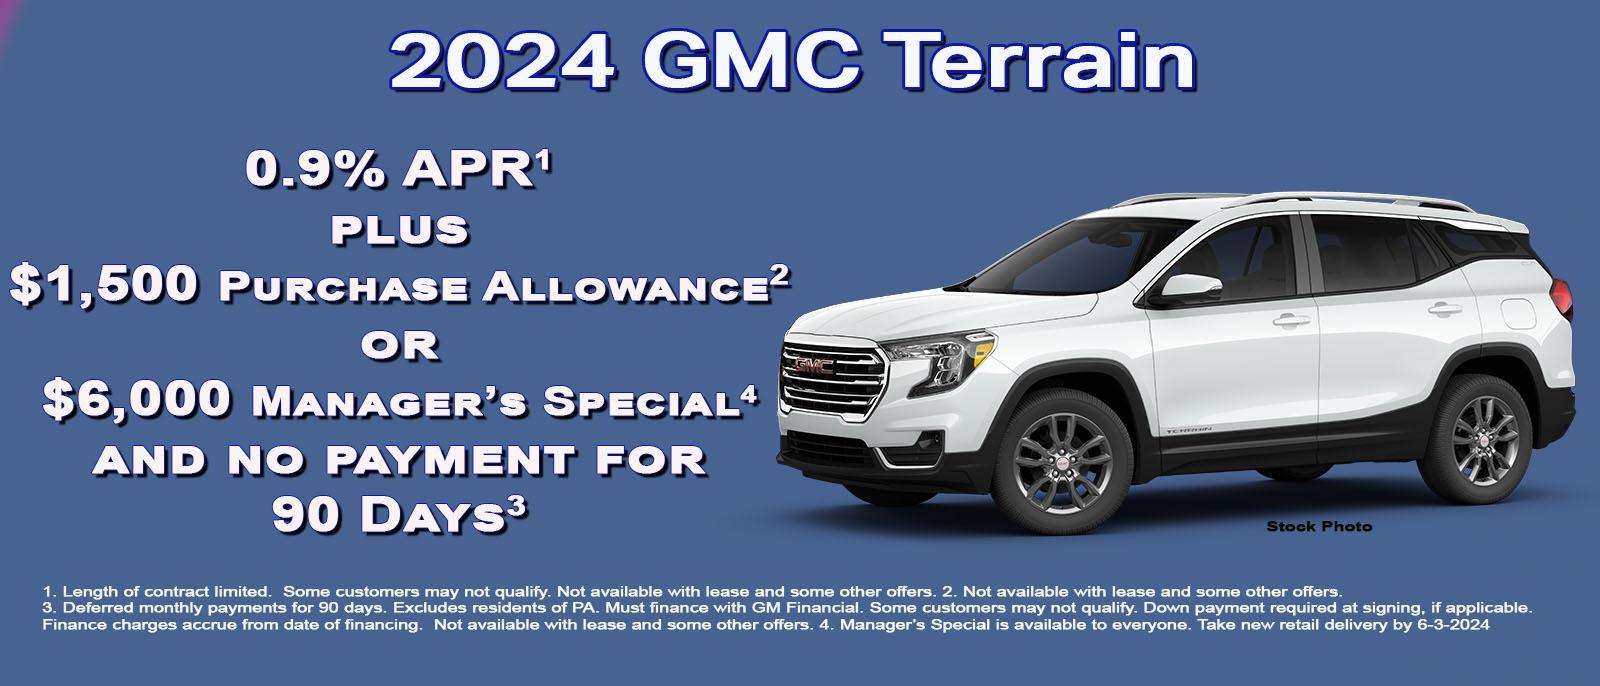 Save up to $6,000 with no payments for 90 days on your new GMC Terrain